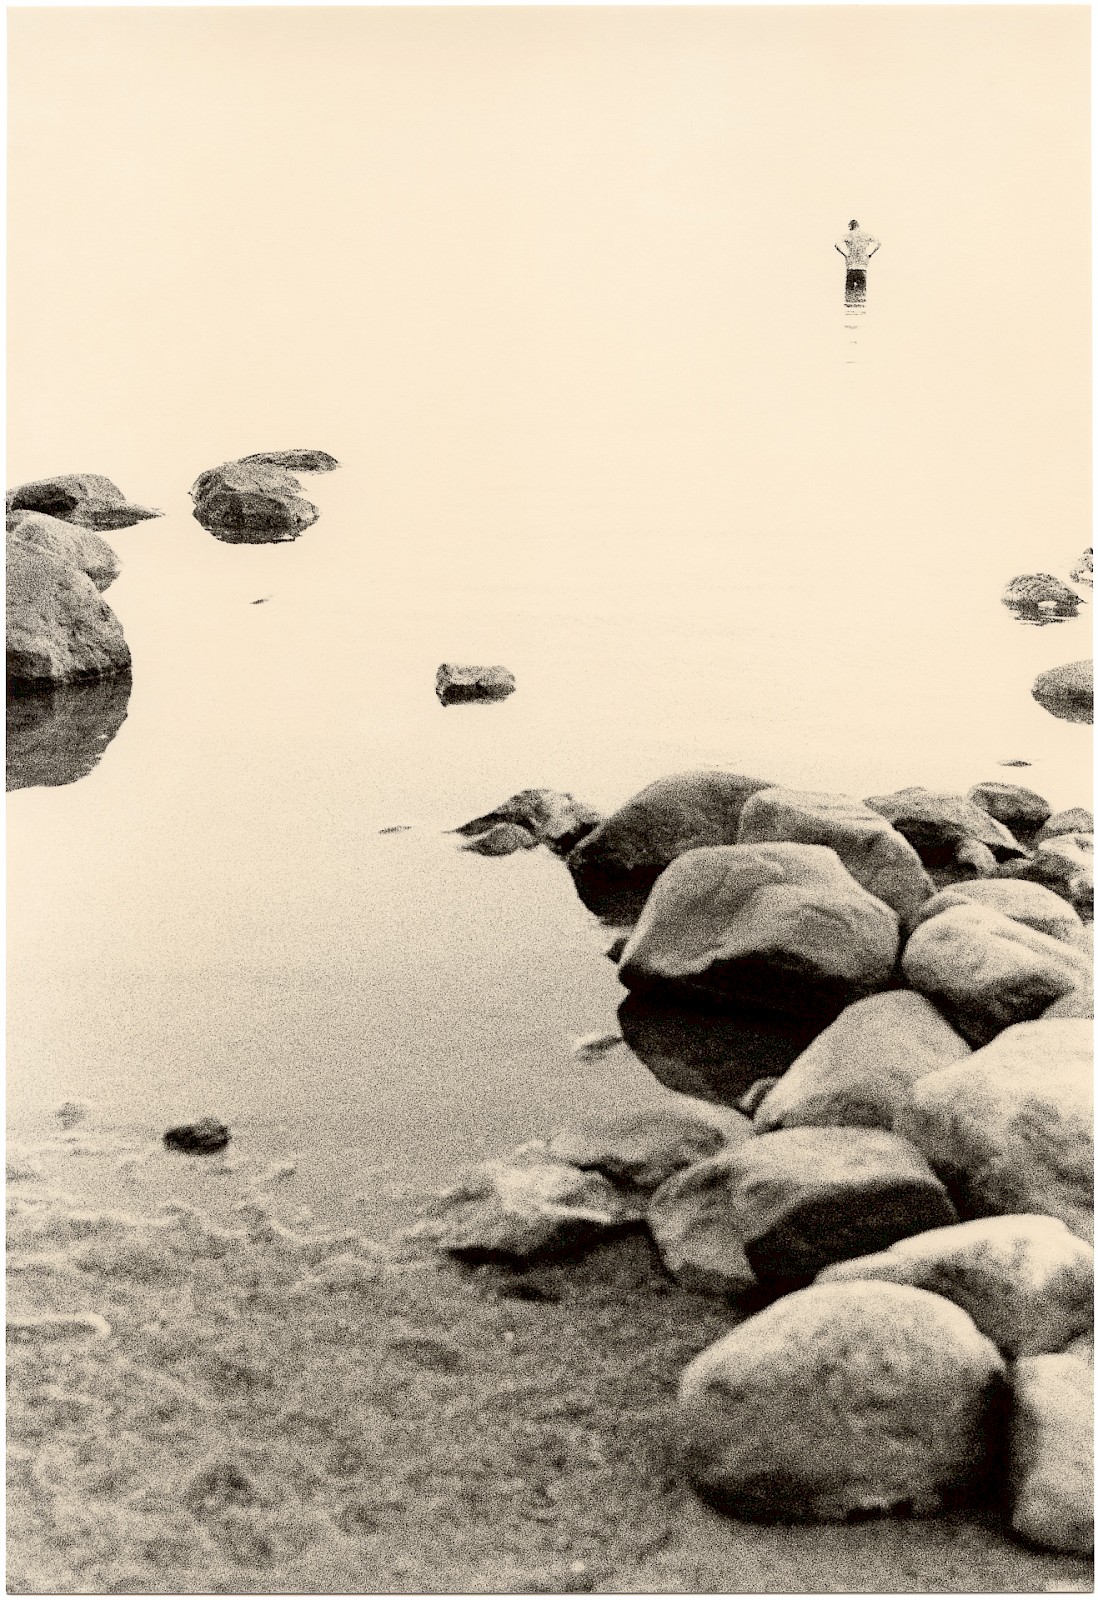 Untitled (rocks and man), silver gelatin photograph by Mikael Siirilä